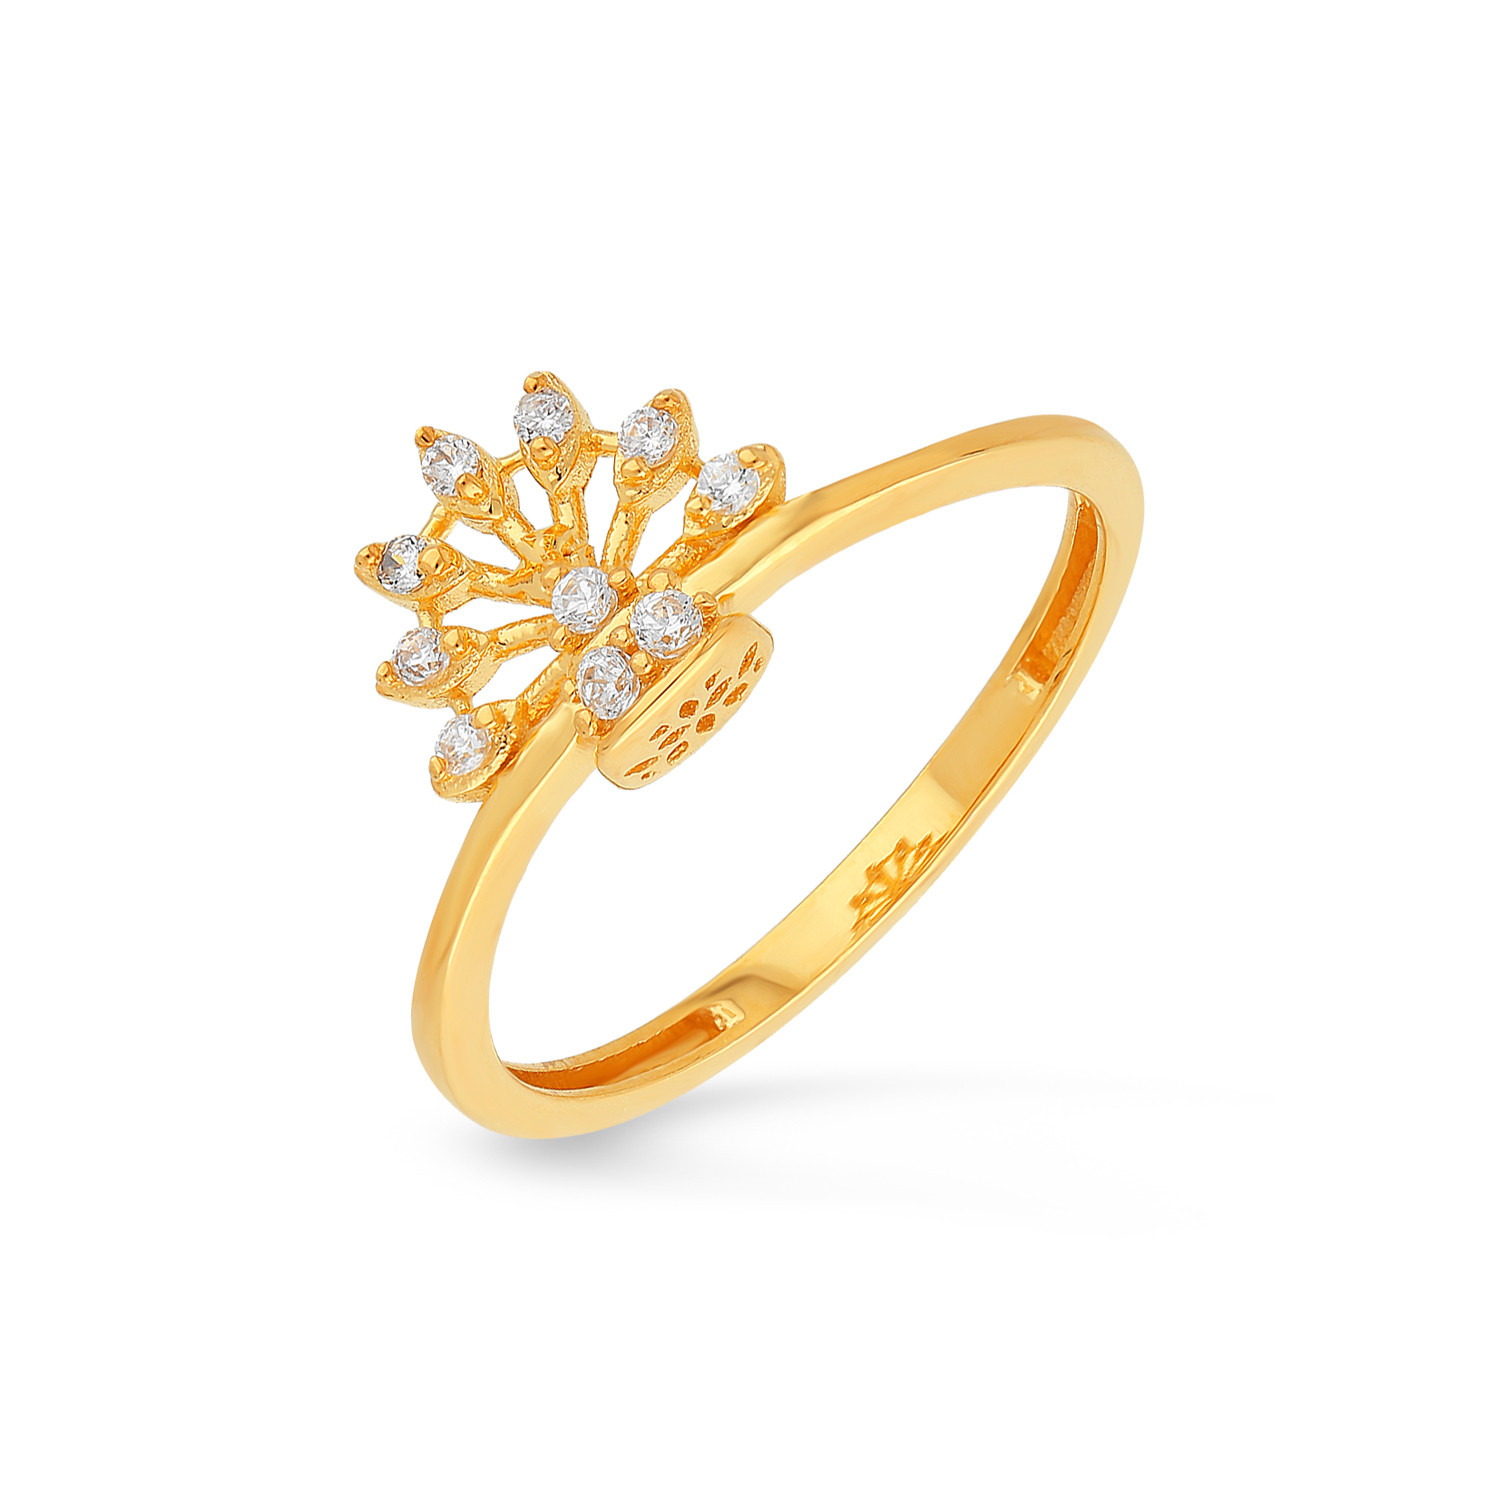 Buy MALABAR GOLD AND DIAMONDS Womens Gold Ring SKYFRDZ026 Size 14 |  Shoppers Stop